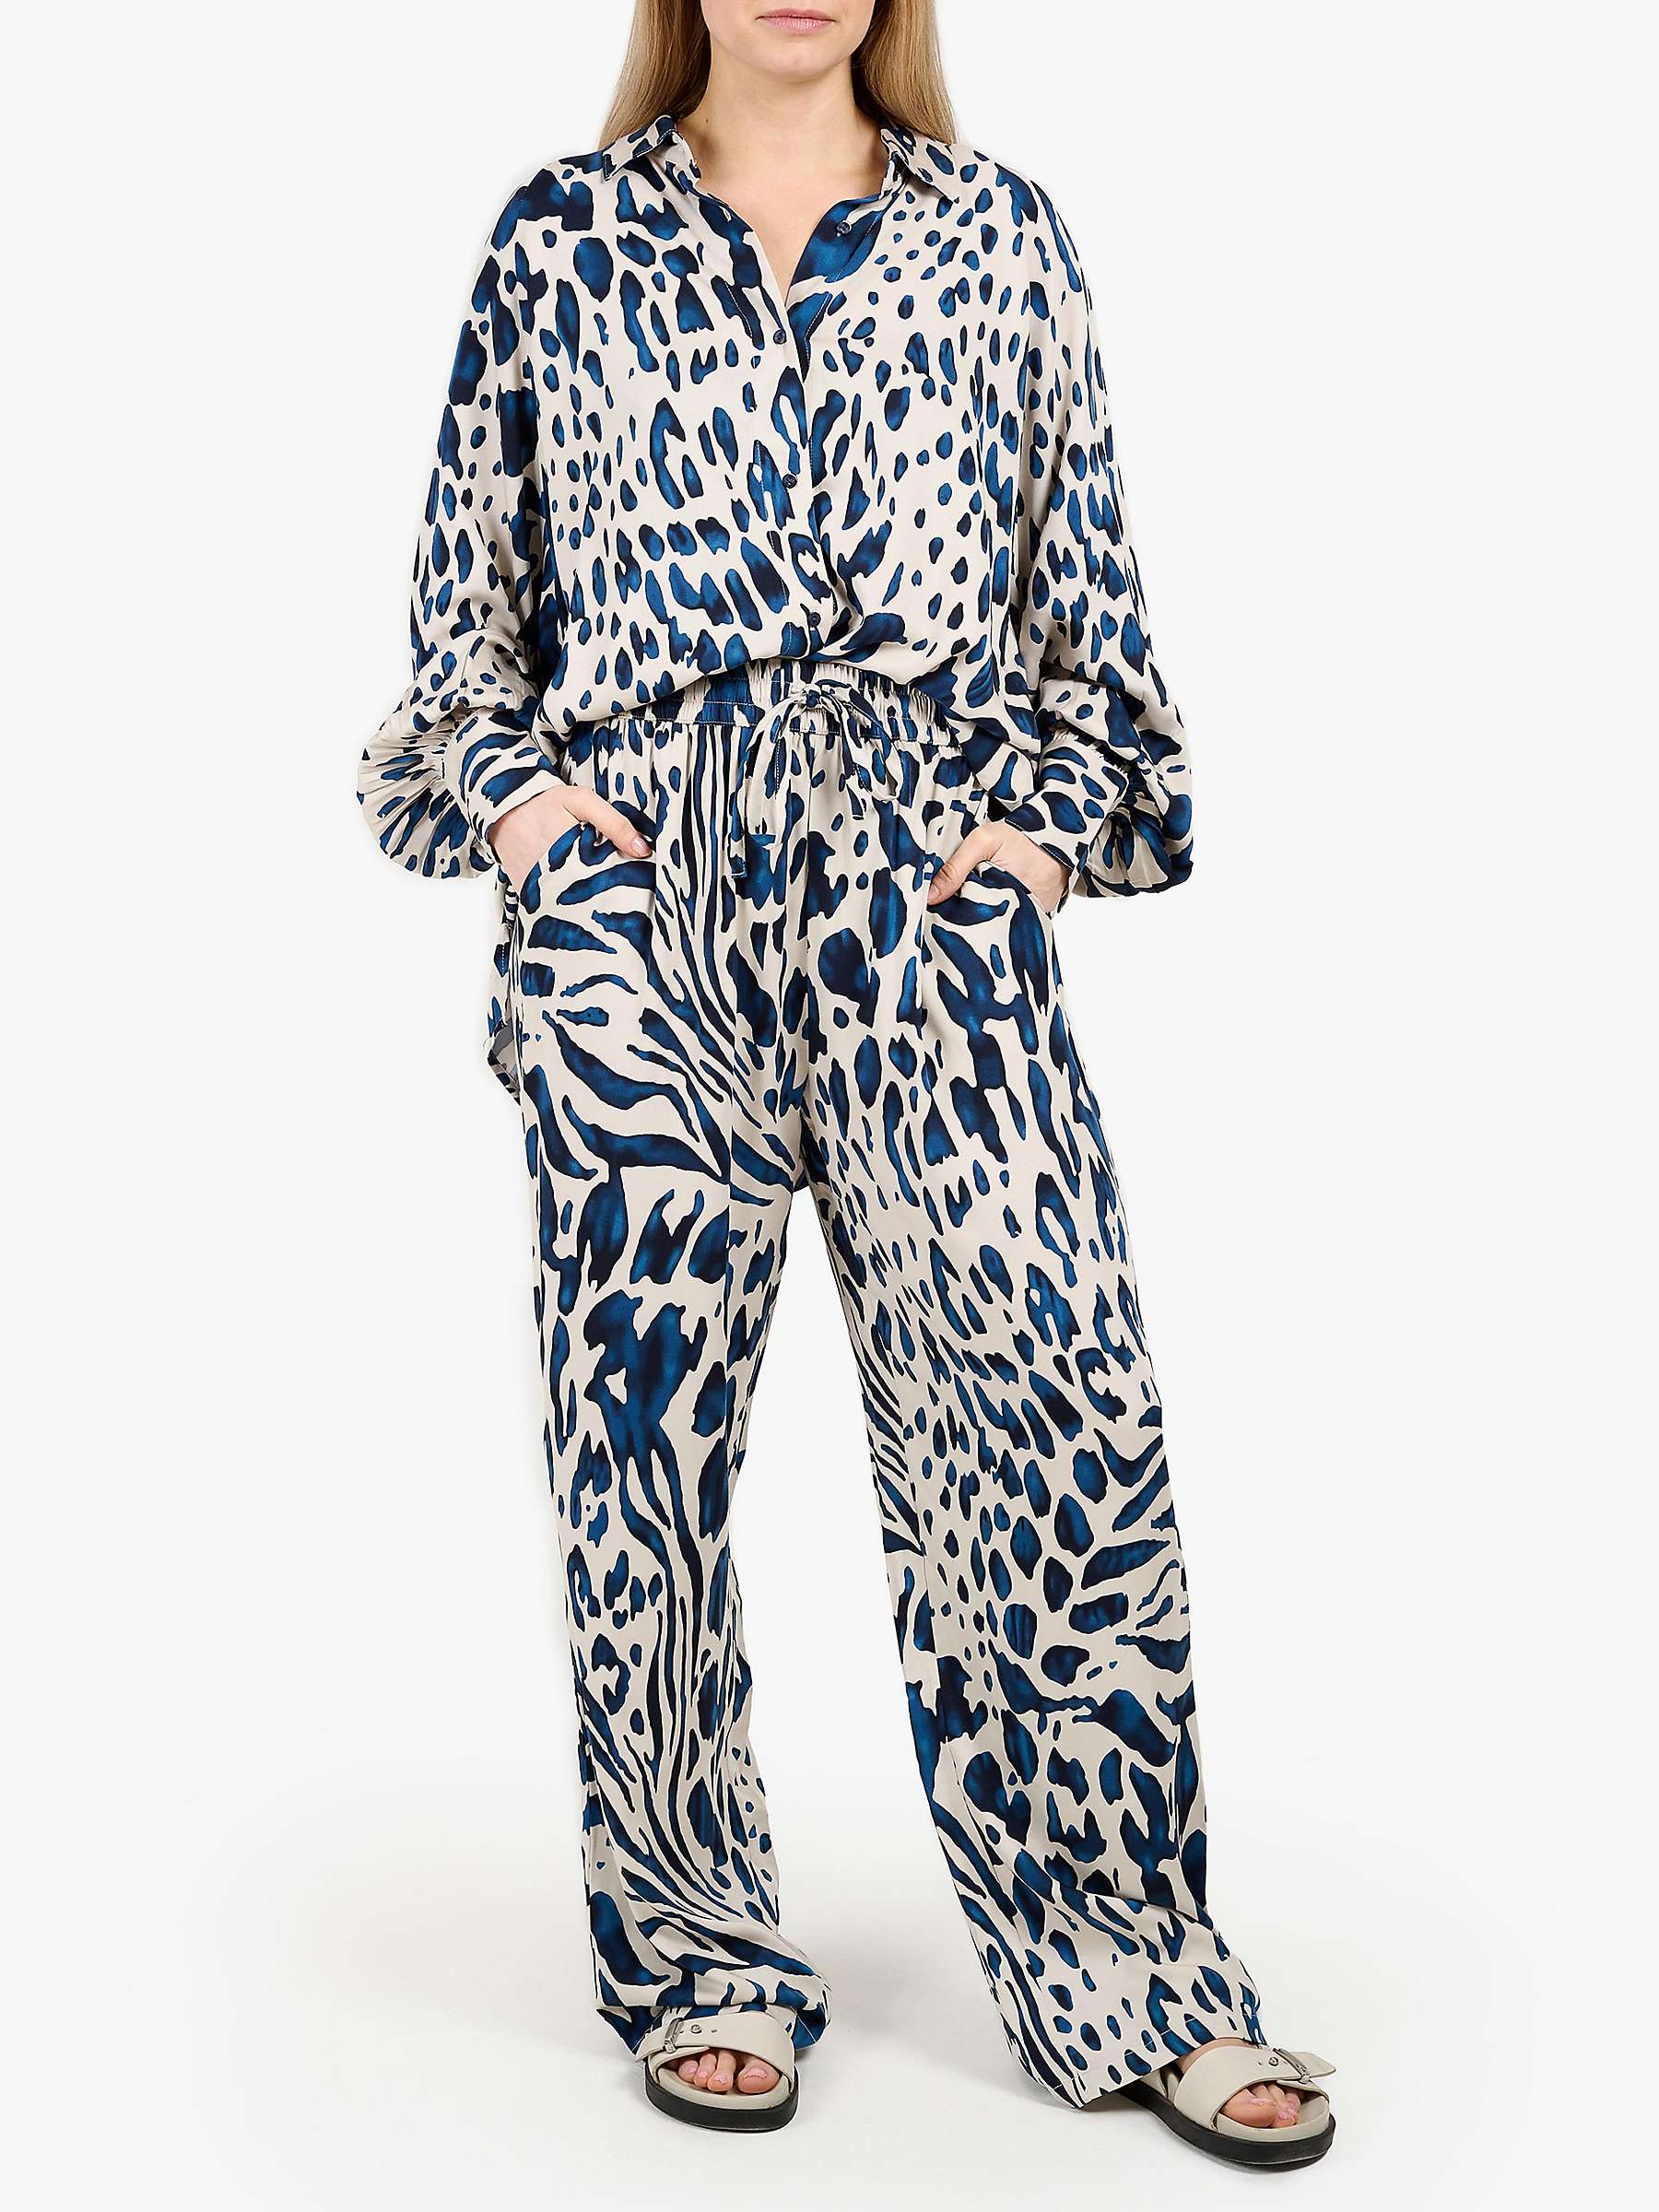 Buy Tutti & Co Praise Abstract Print Oversized Shirt, Blue/Multi Online at johnlewis.com